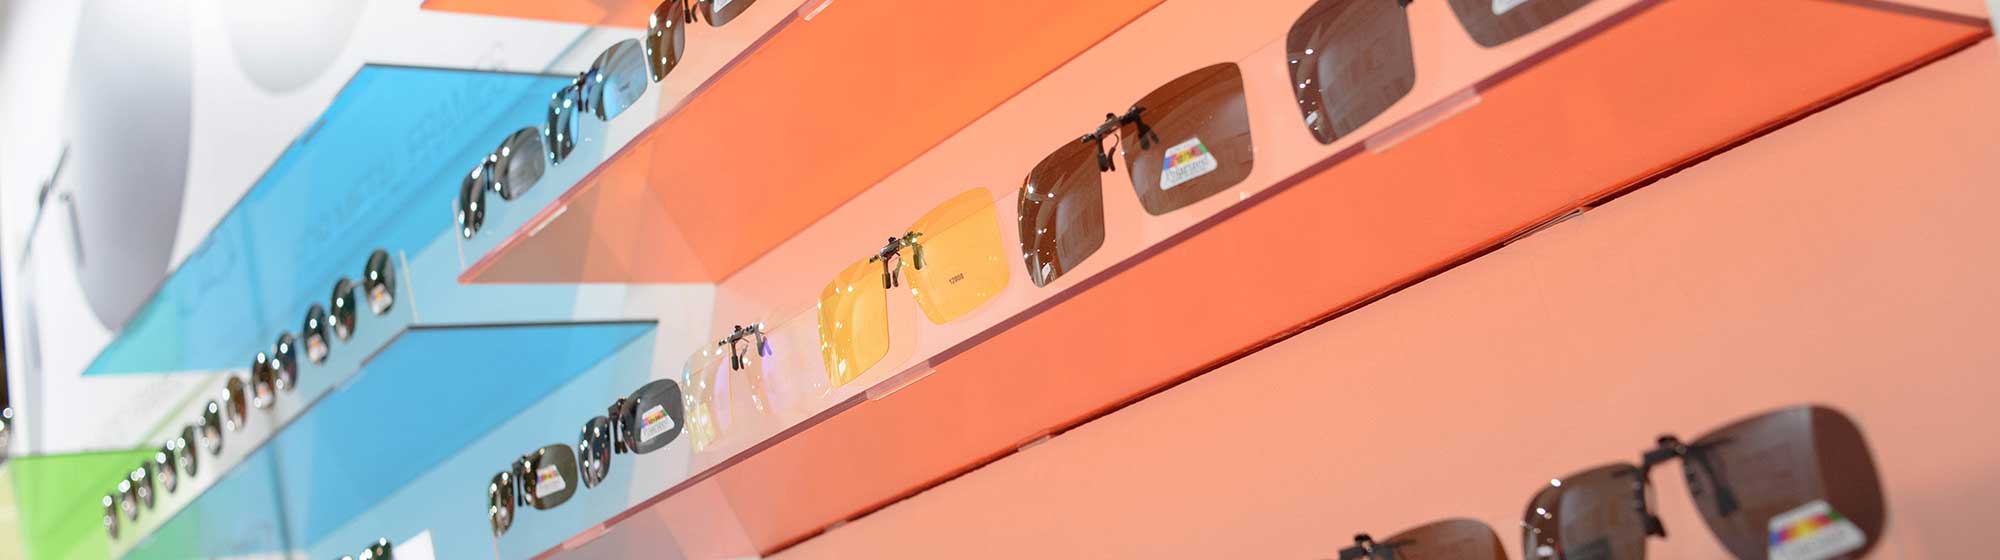 Several glasses presented on a wall